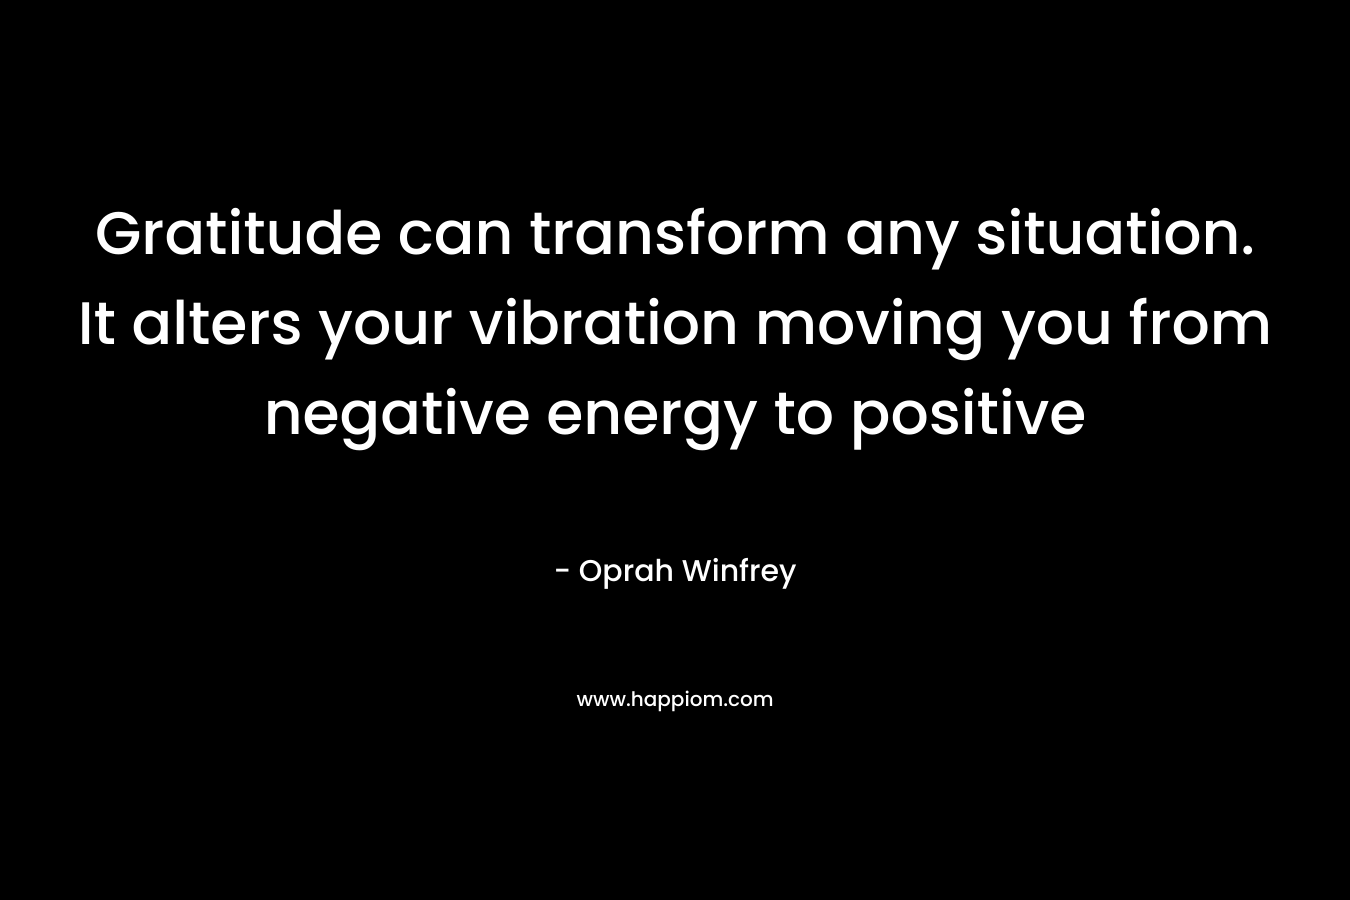 Gratitude can transform any situation. It alters your vibration moving you from negative energy to positive – Oprah Winfrey